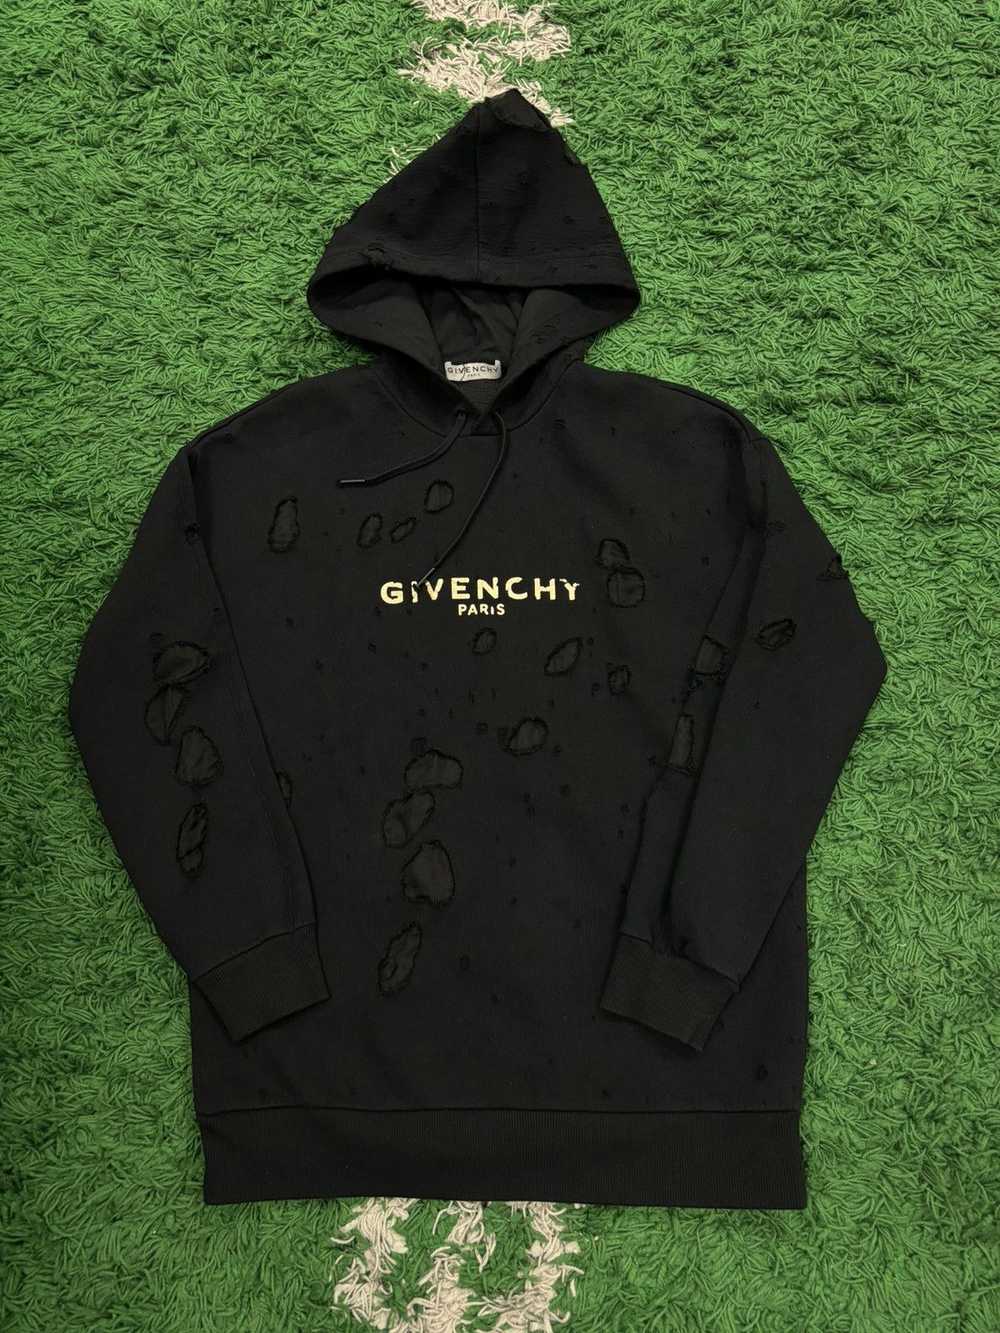 Givenchy Givenchy distressed black gold hoodie me… - image 1